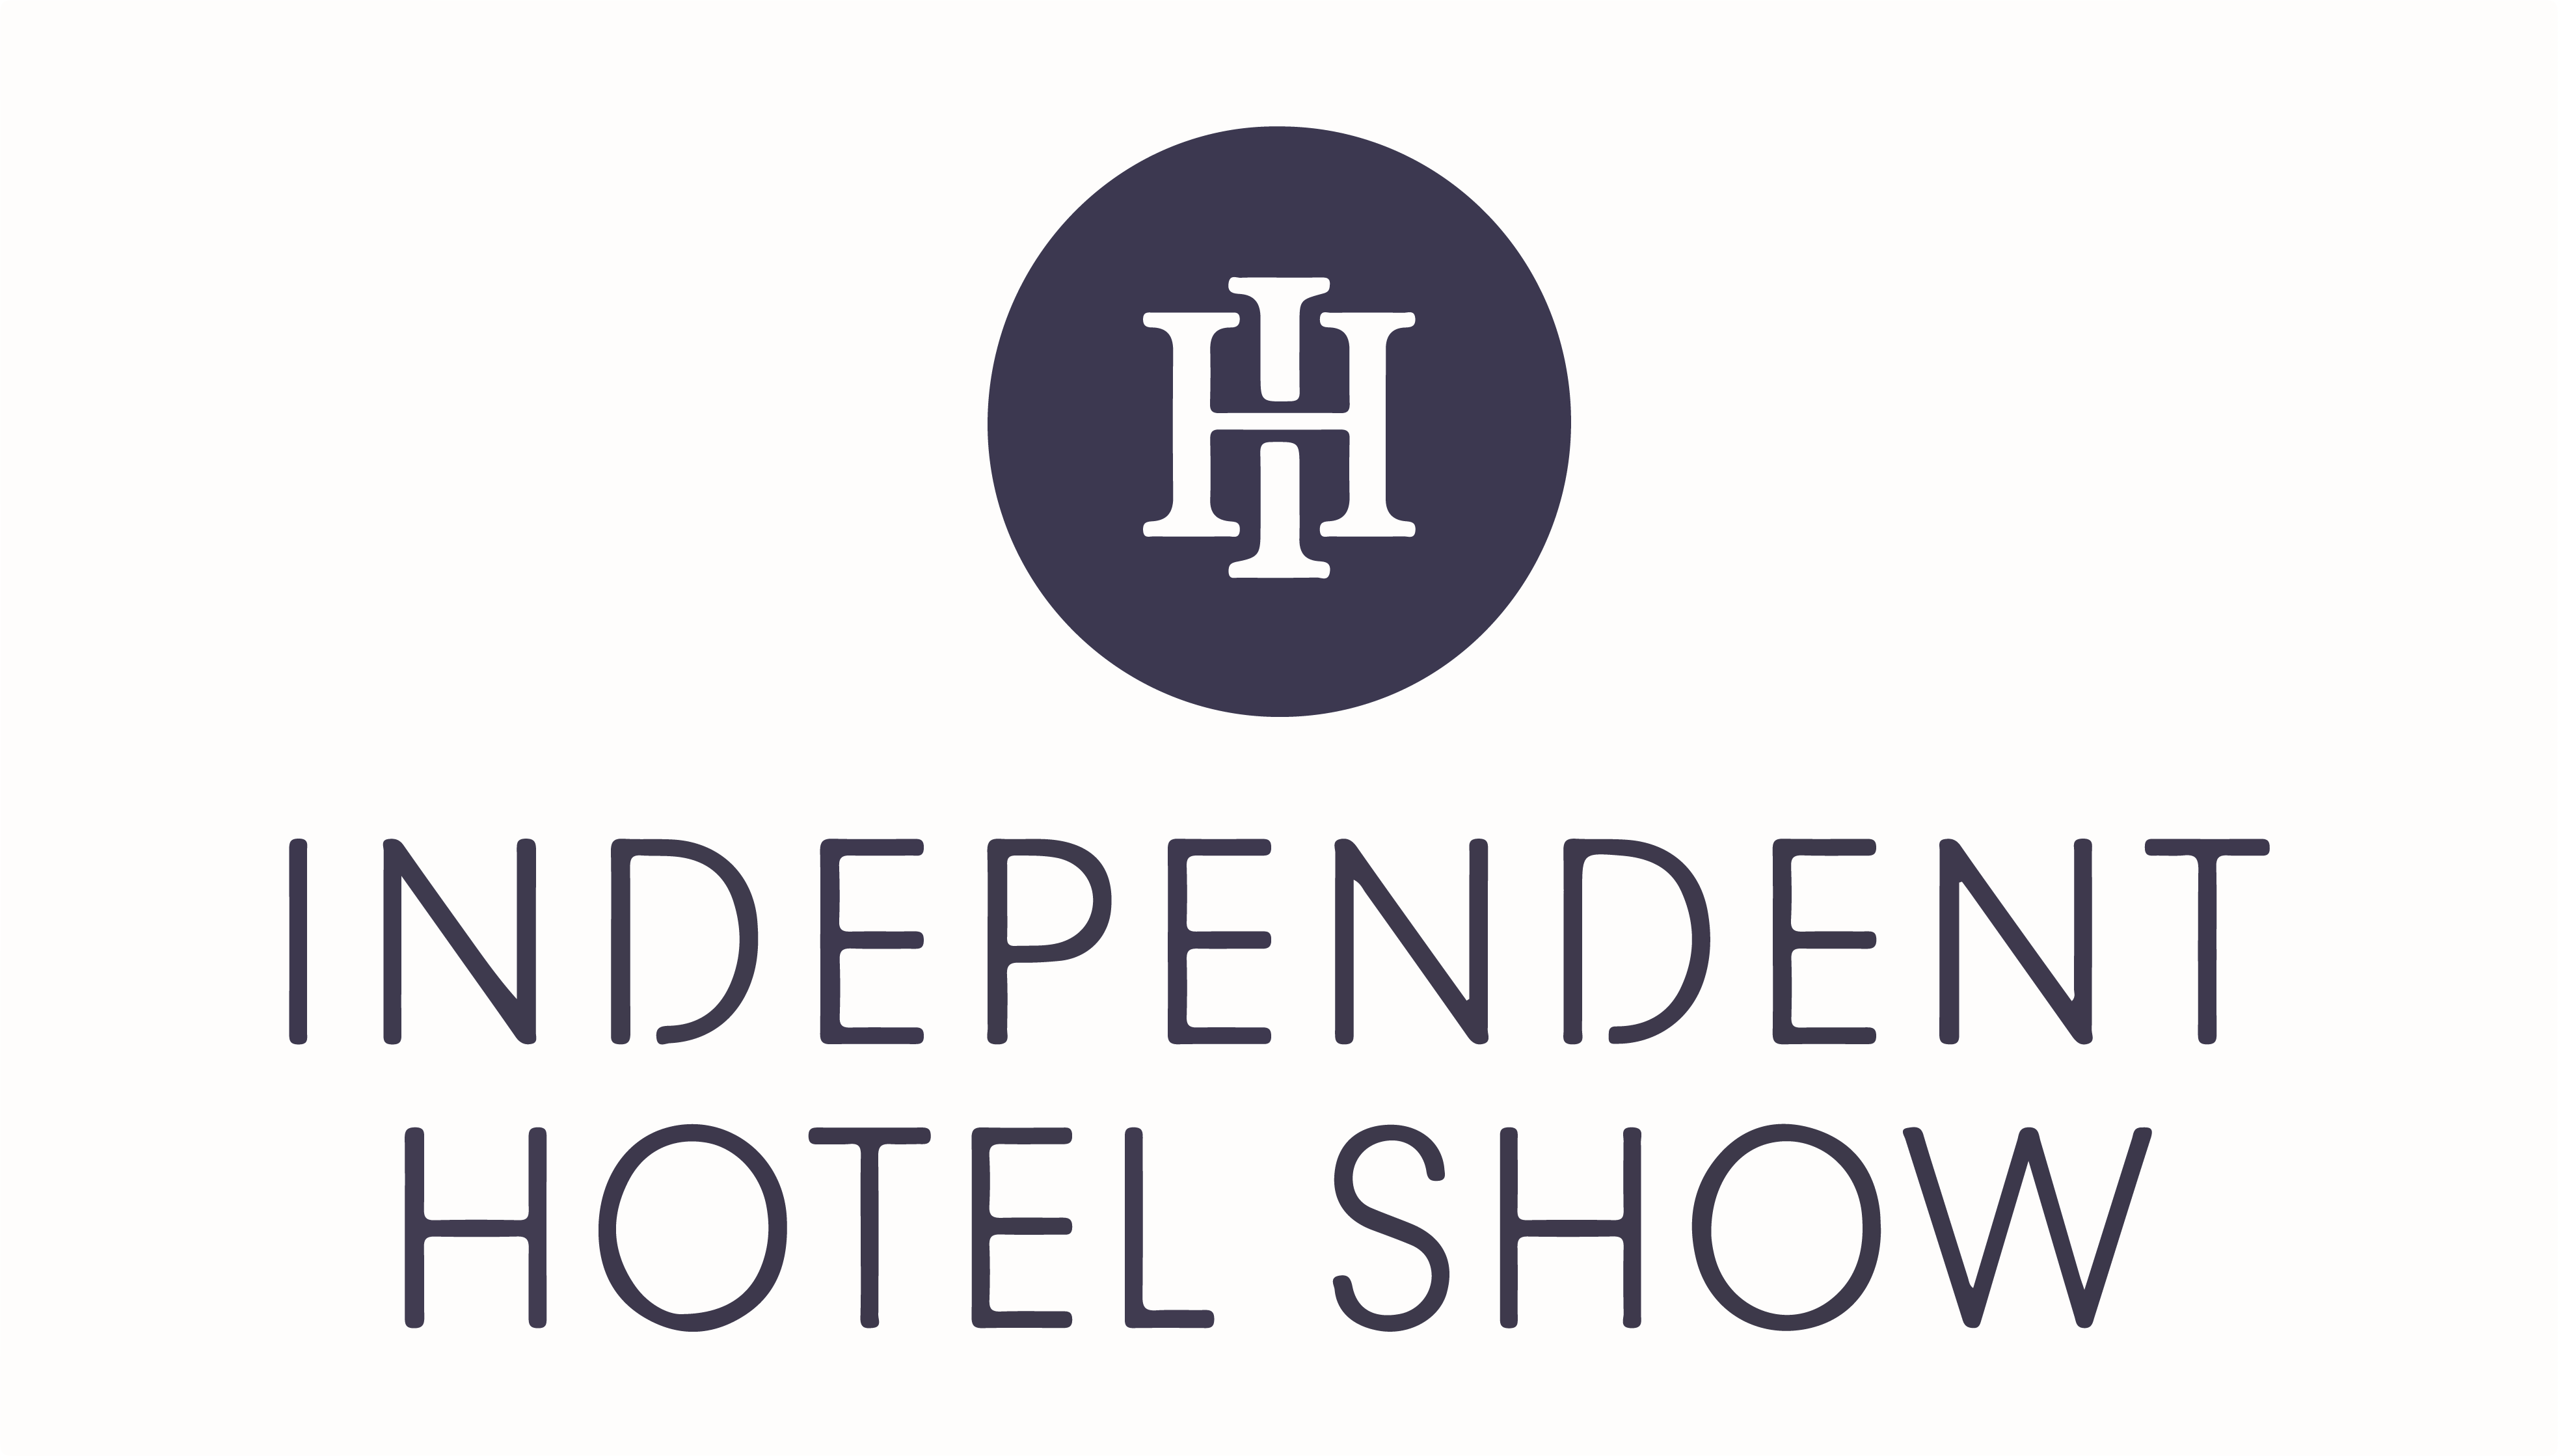 Independent Hotel Show - London 2021